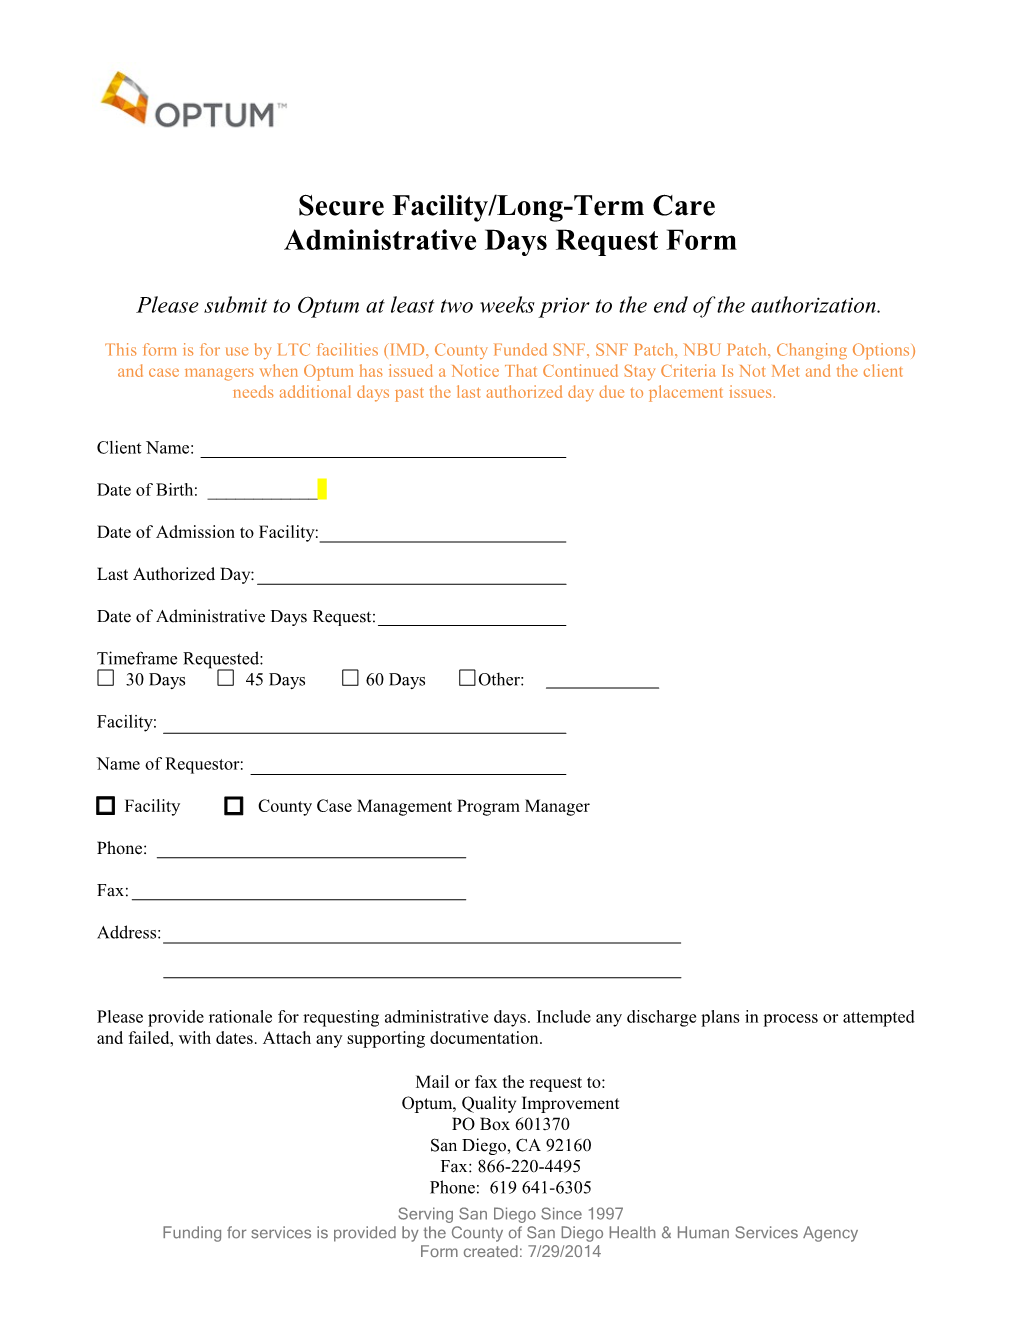 Administrative Days Request Form